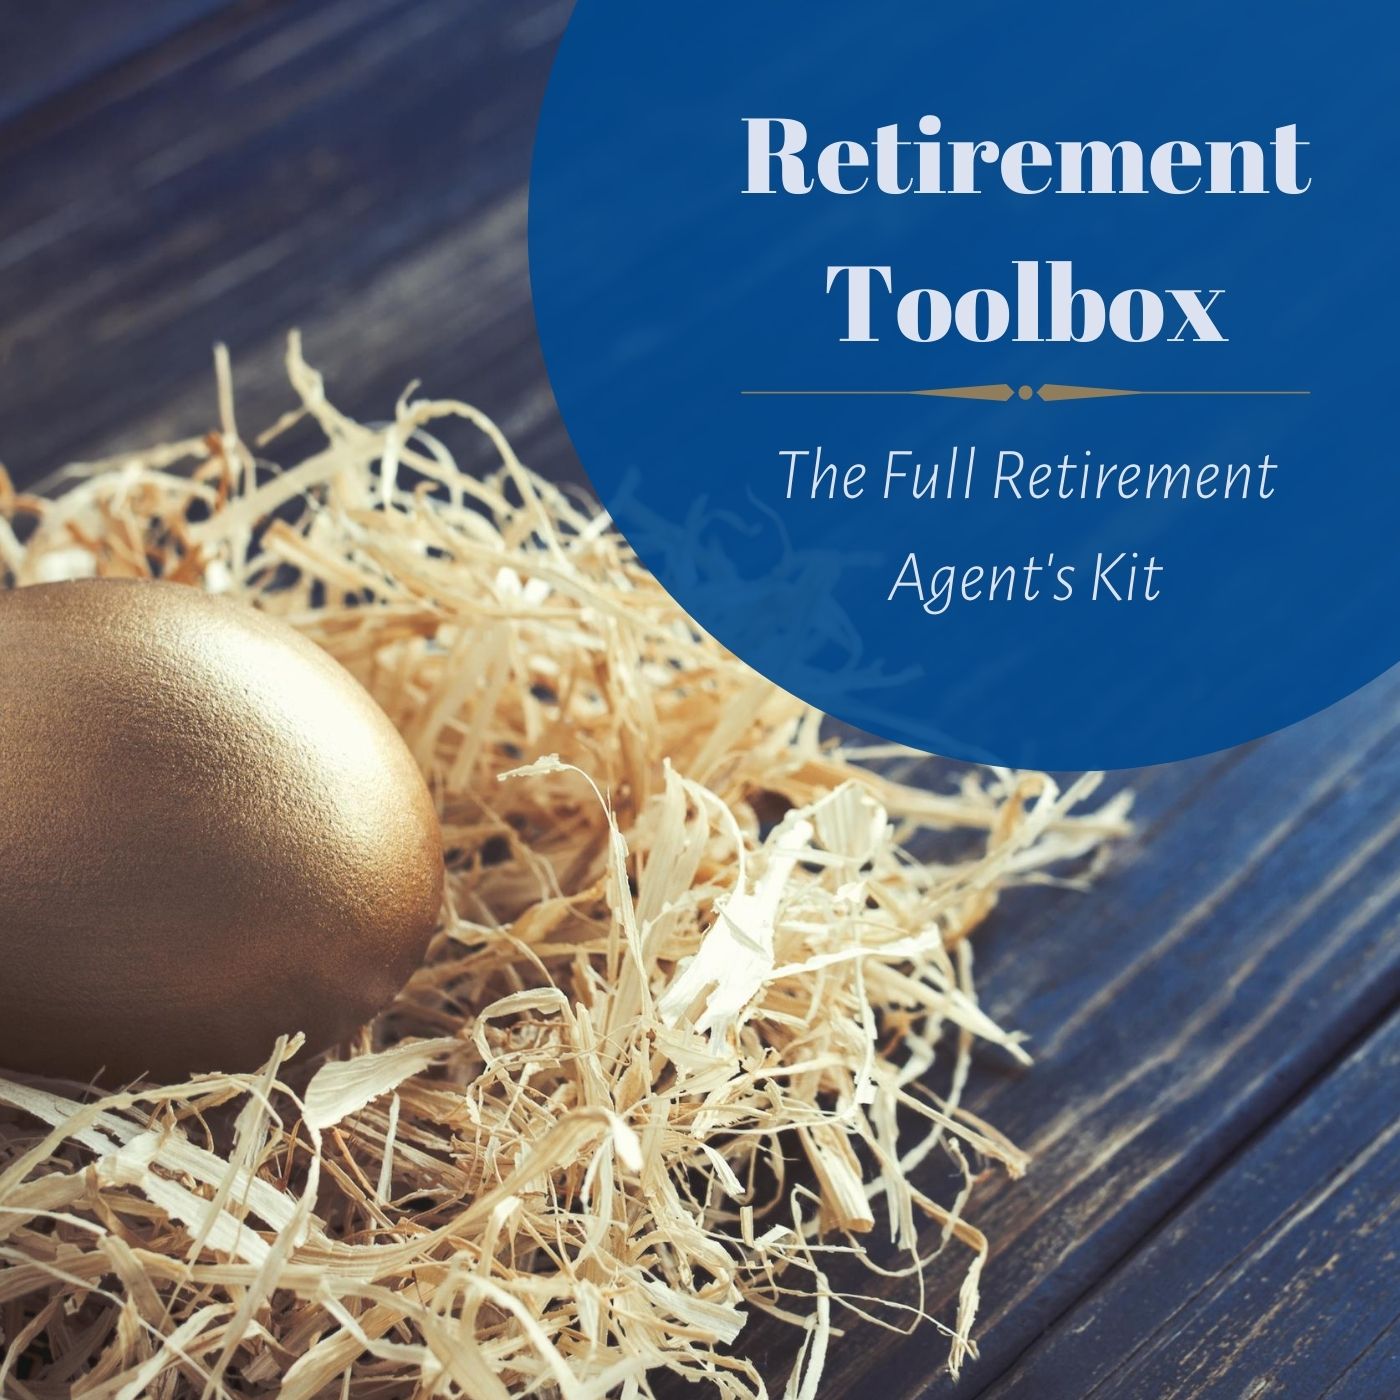 Copy of Retirement Toolbox Banner (1)